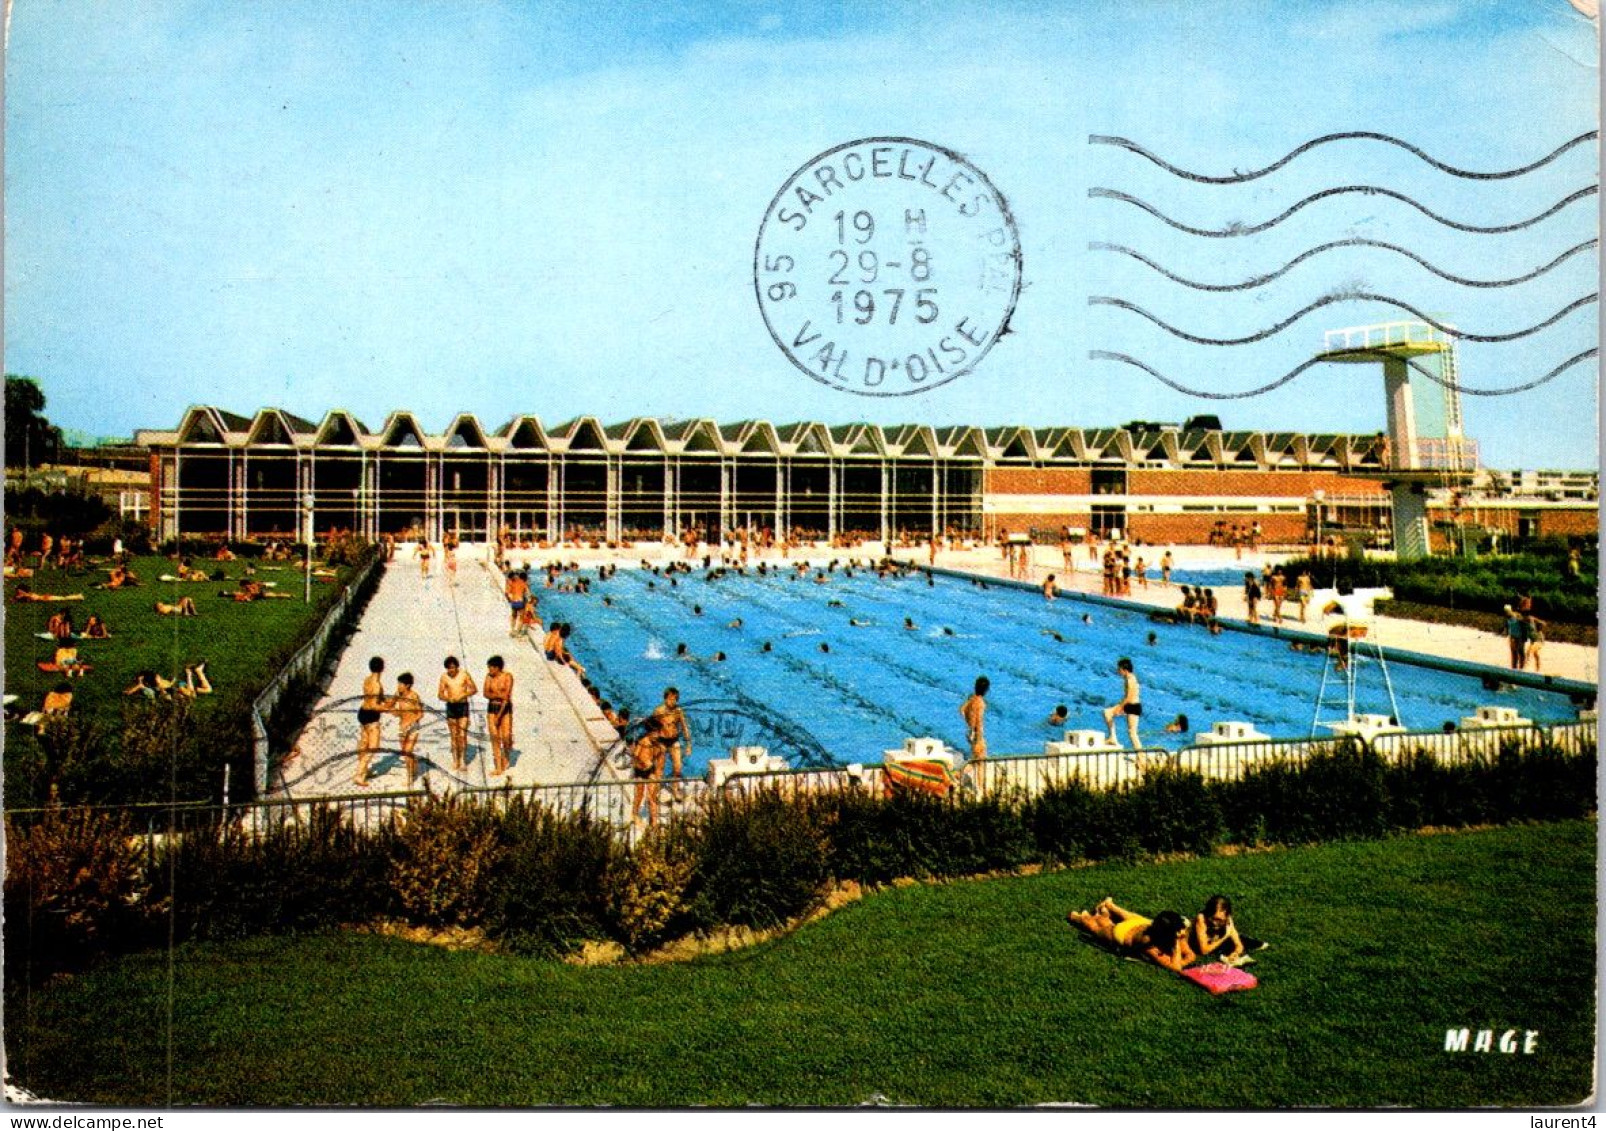 24-1-2024 (2 X 11) France - Piscine De Sarcelles (Swimming Pool) - Posted 1975 (and RTS) - Swimming